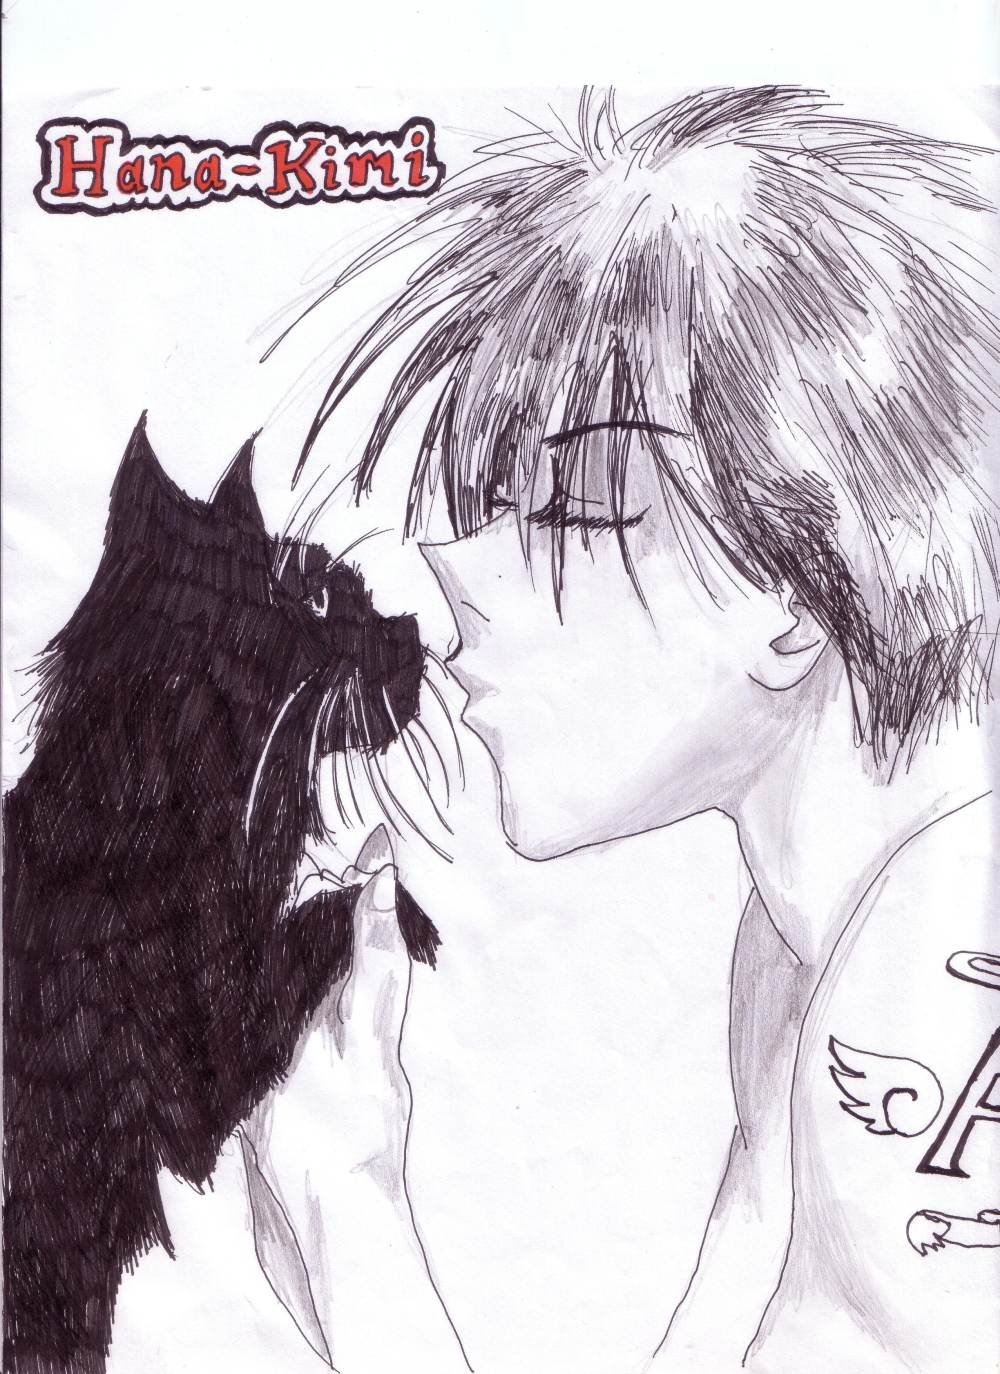 nakatsu and his cat by L33t_girl